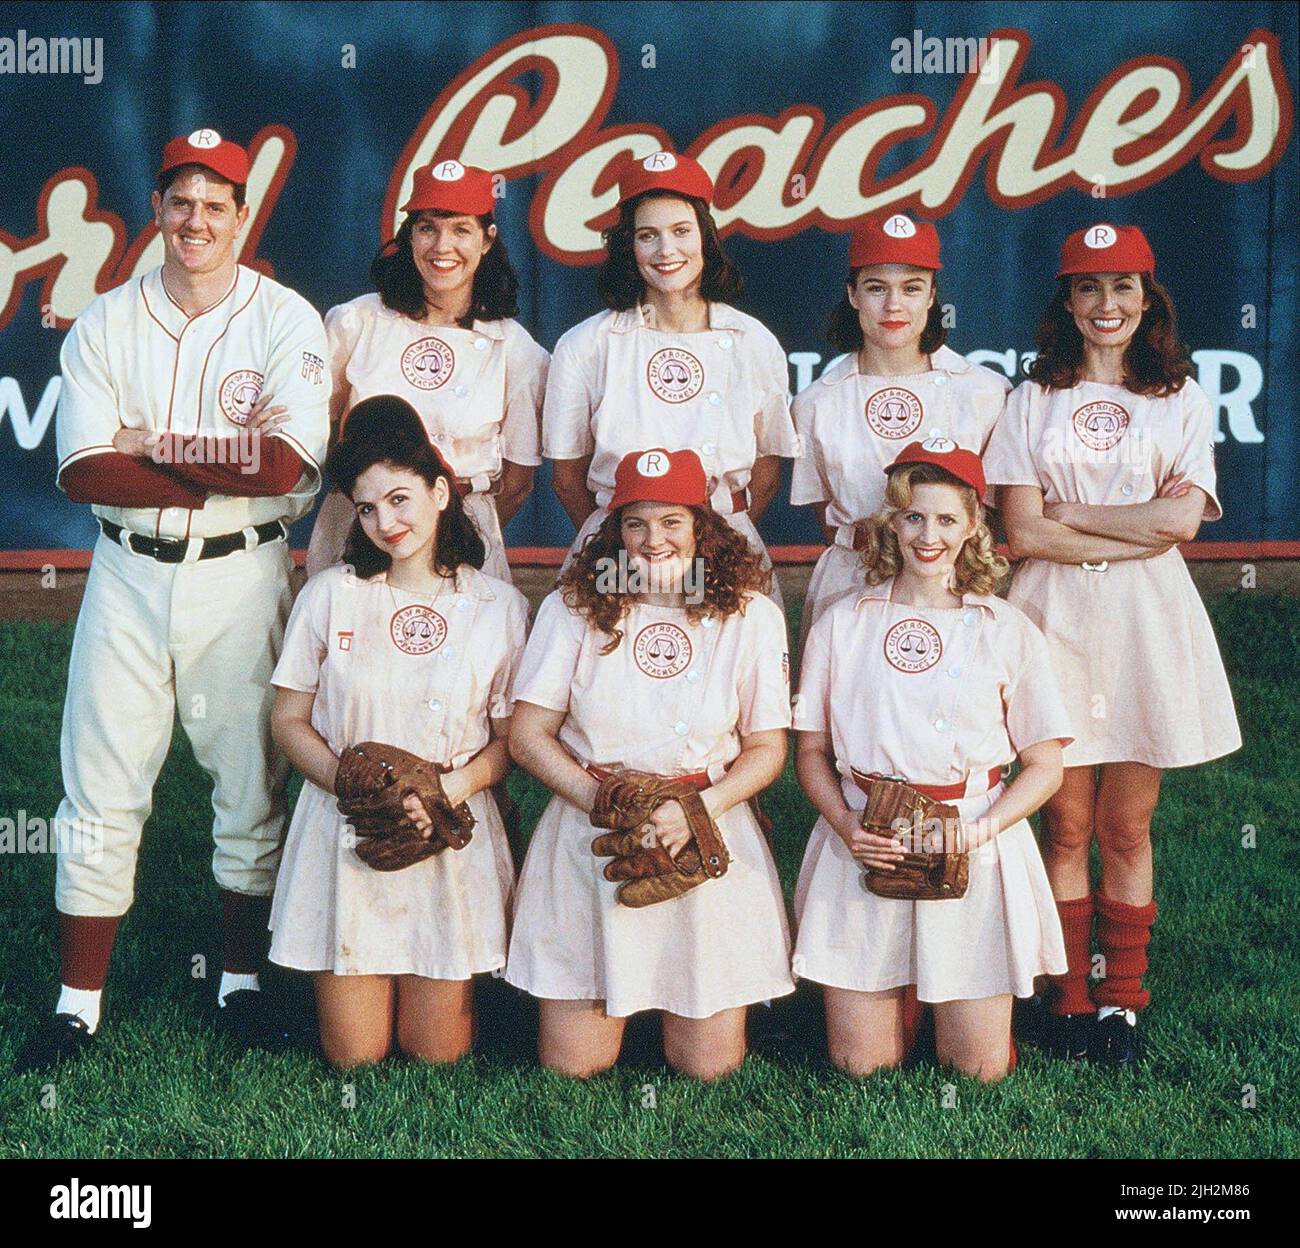 MCMURRAY,LOWELL,ELISE,MAKKENA,REINER,CAVANAGH, A LEAGUE OF THEIR OWN, 1992 Stockfoto